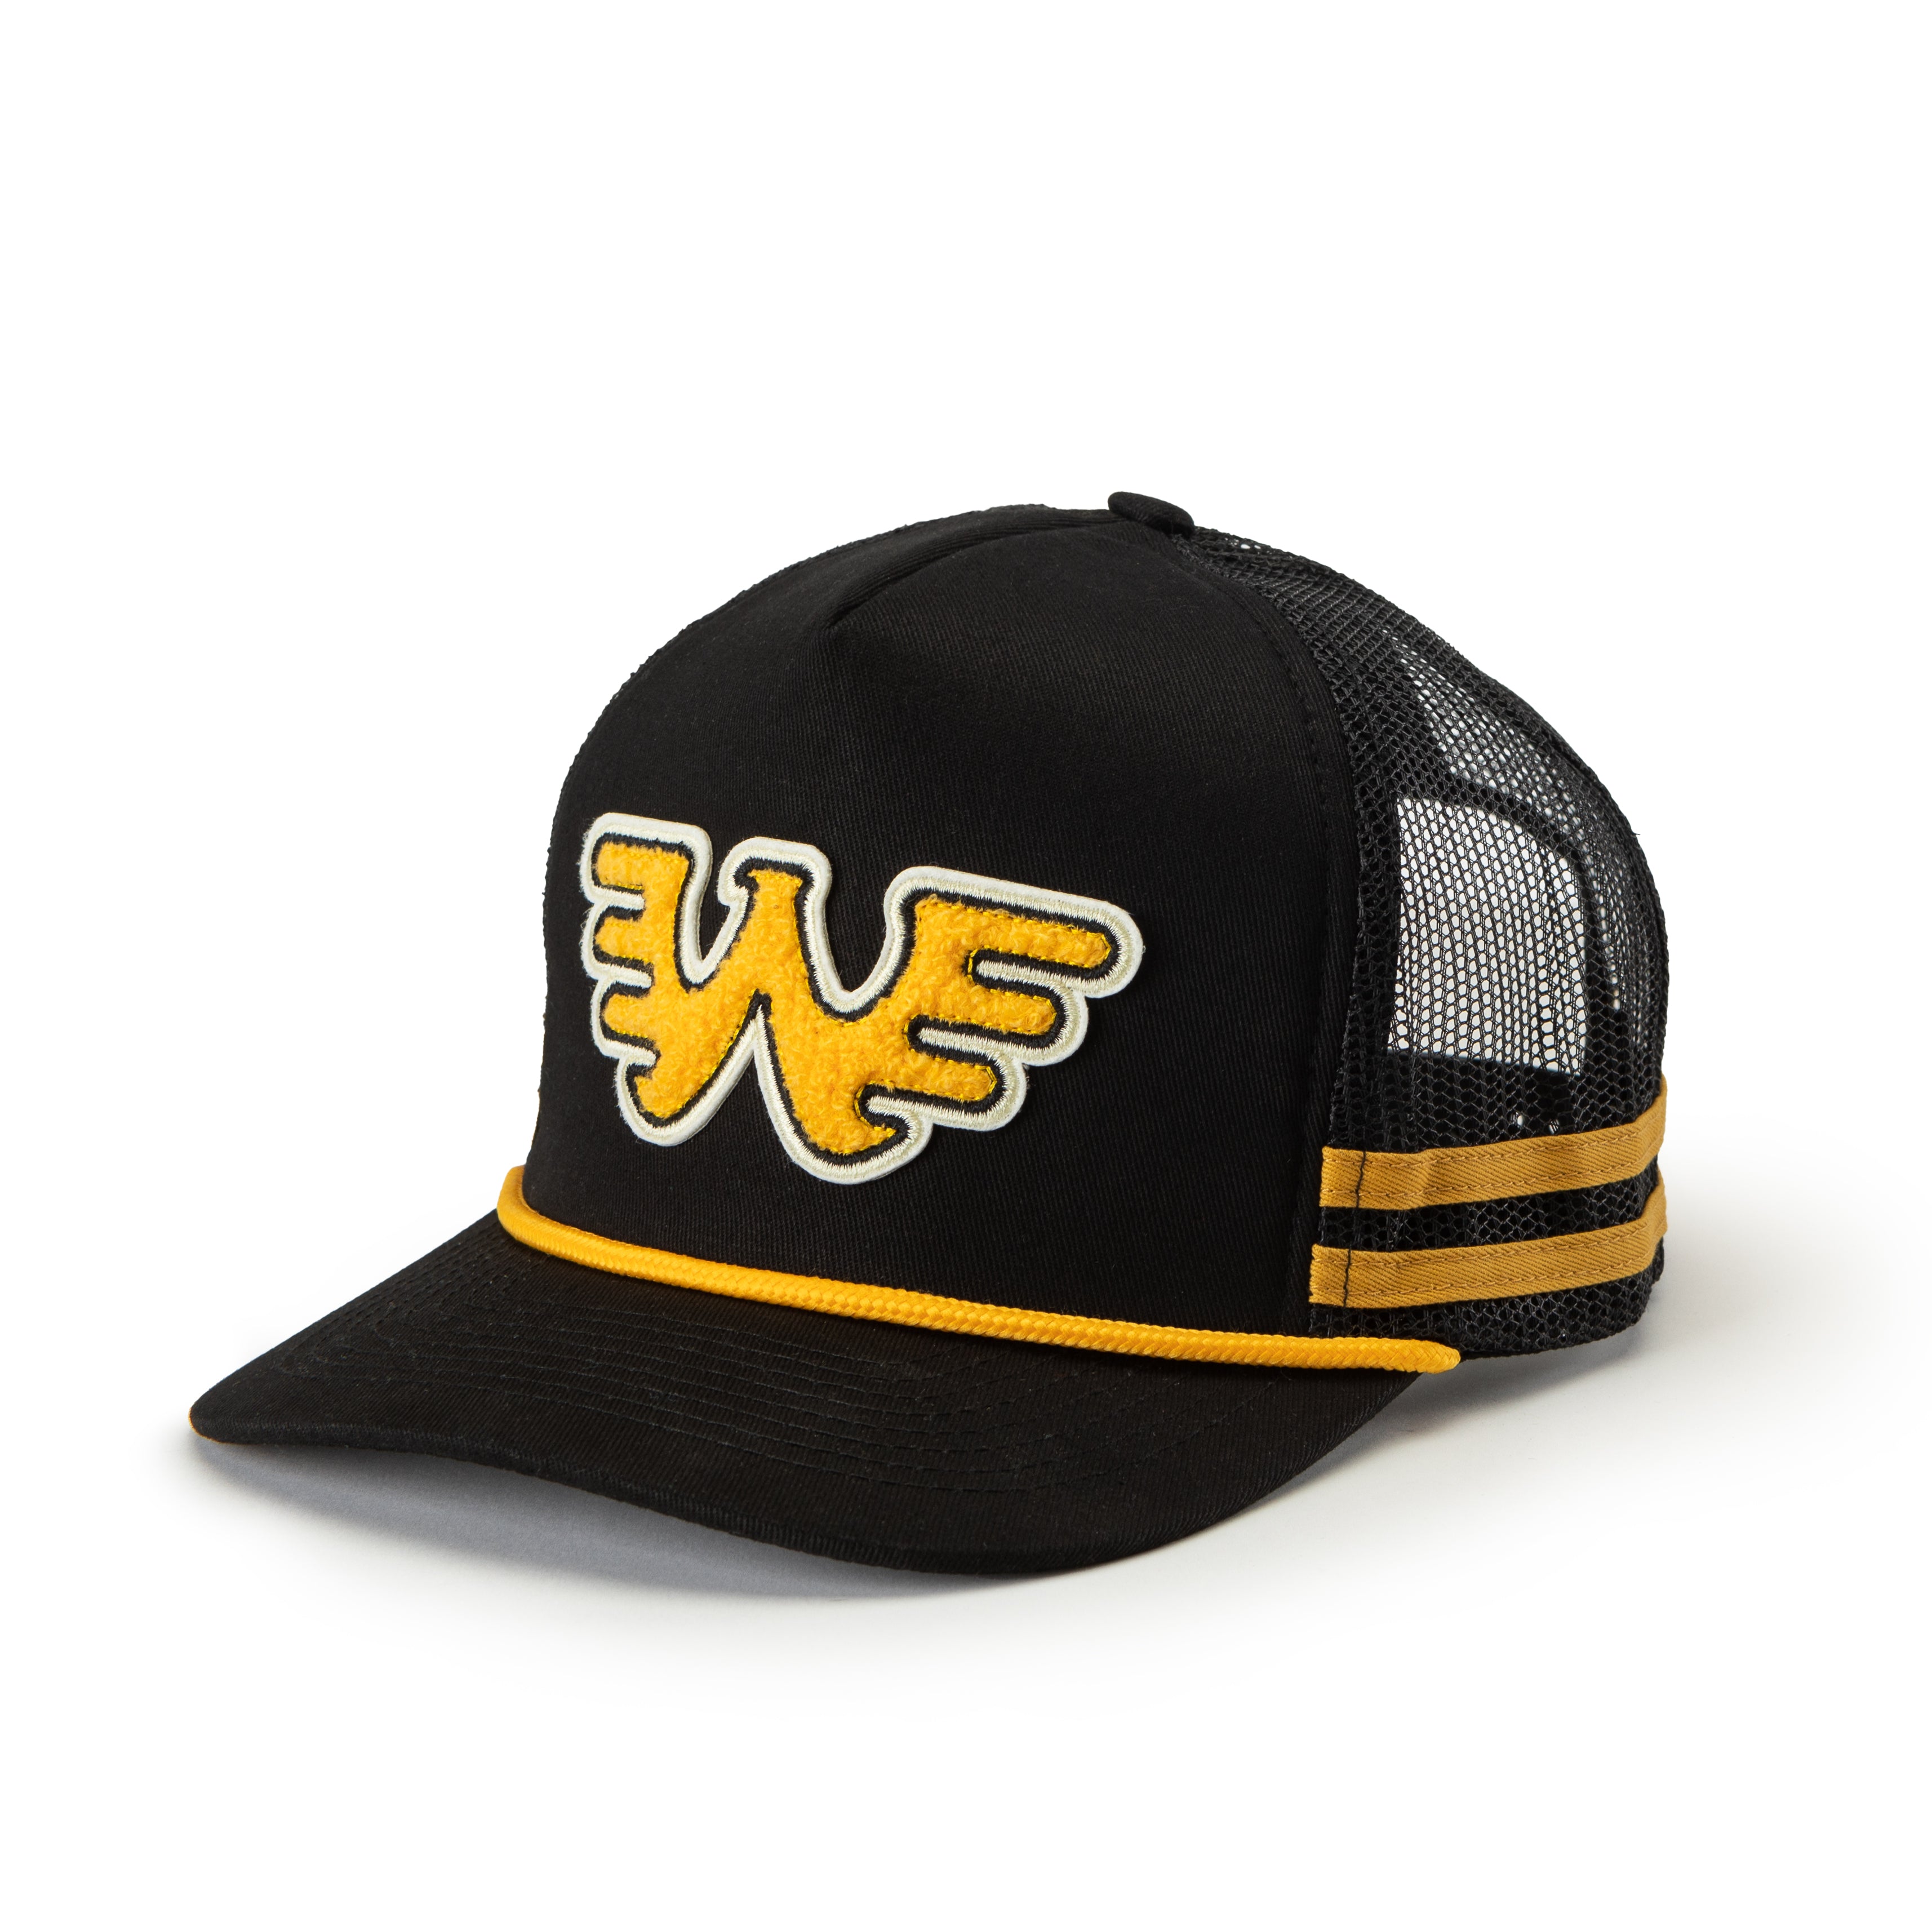 Waylon Jennings Sunshade Mission Baseball Cap Adjustable Snapback Trucker  Hat For Men And Women, Ideal For Fishing And Outdoor Activities From Humom,  $19.74